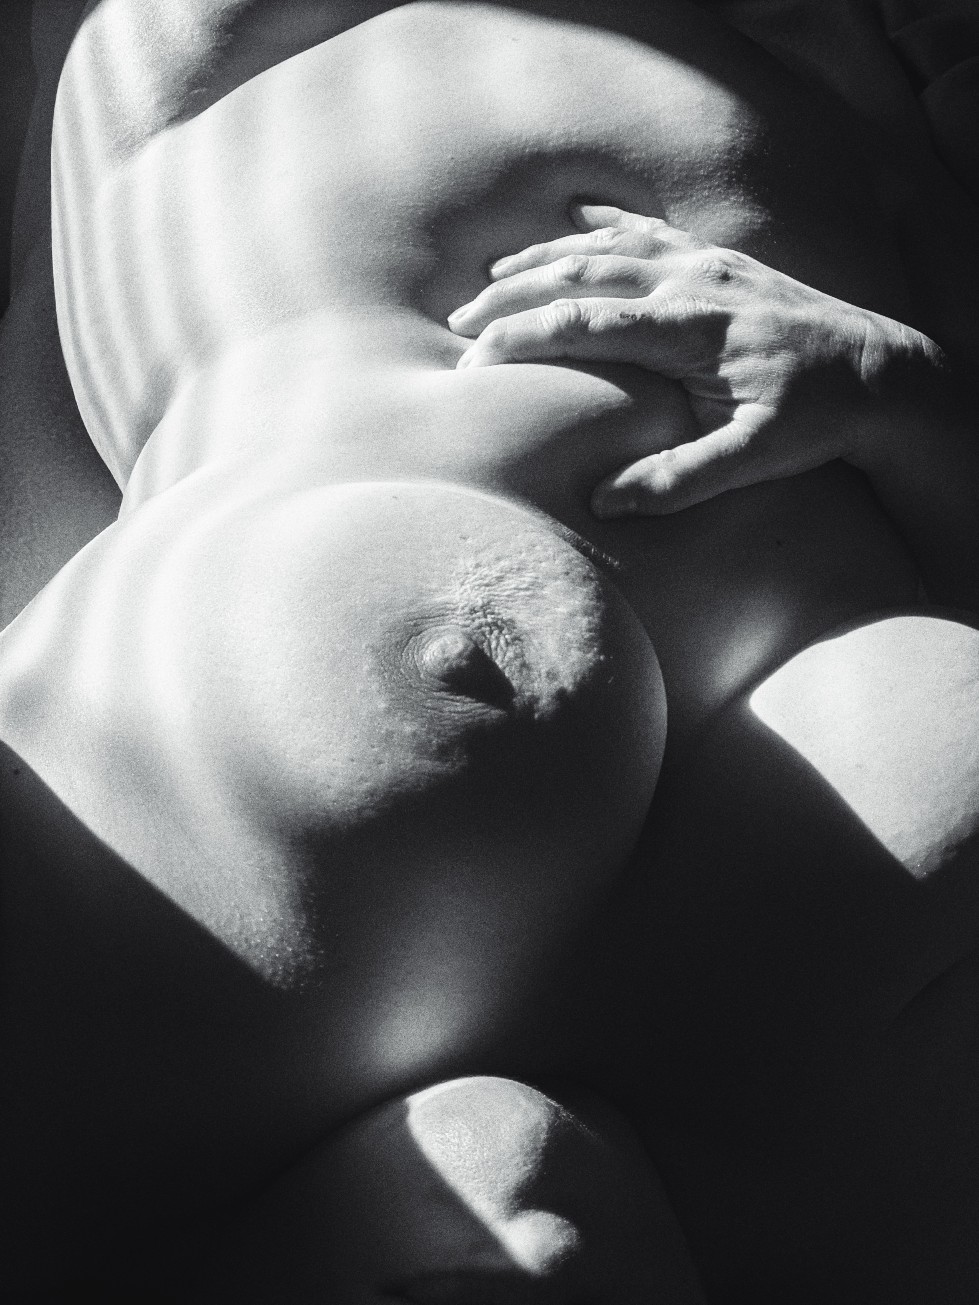 black and white photo, nude woman, sharp contrast, hand grabbing belly